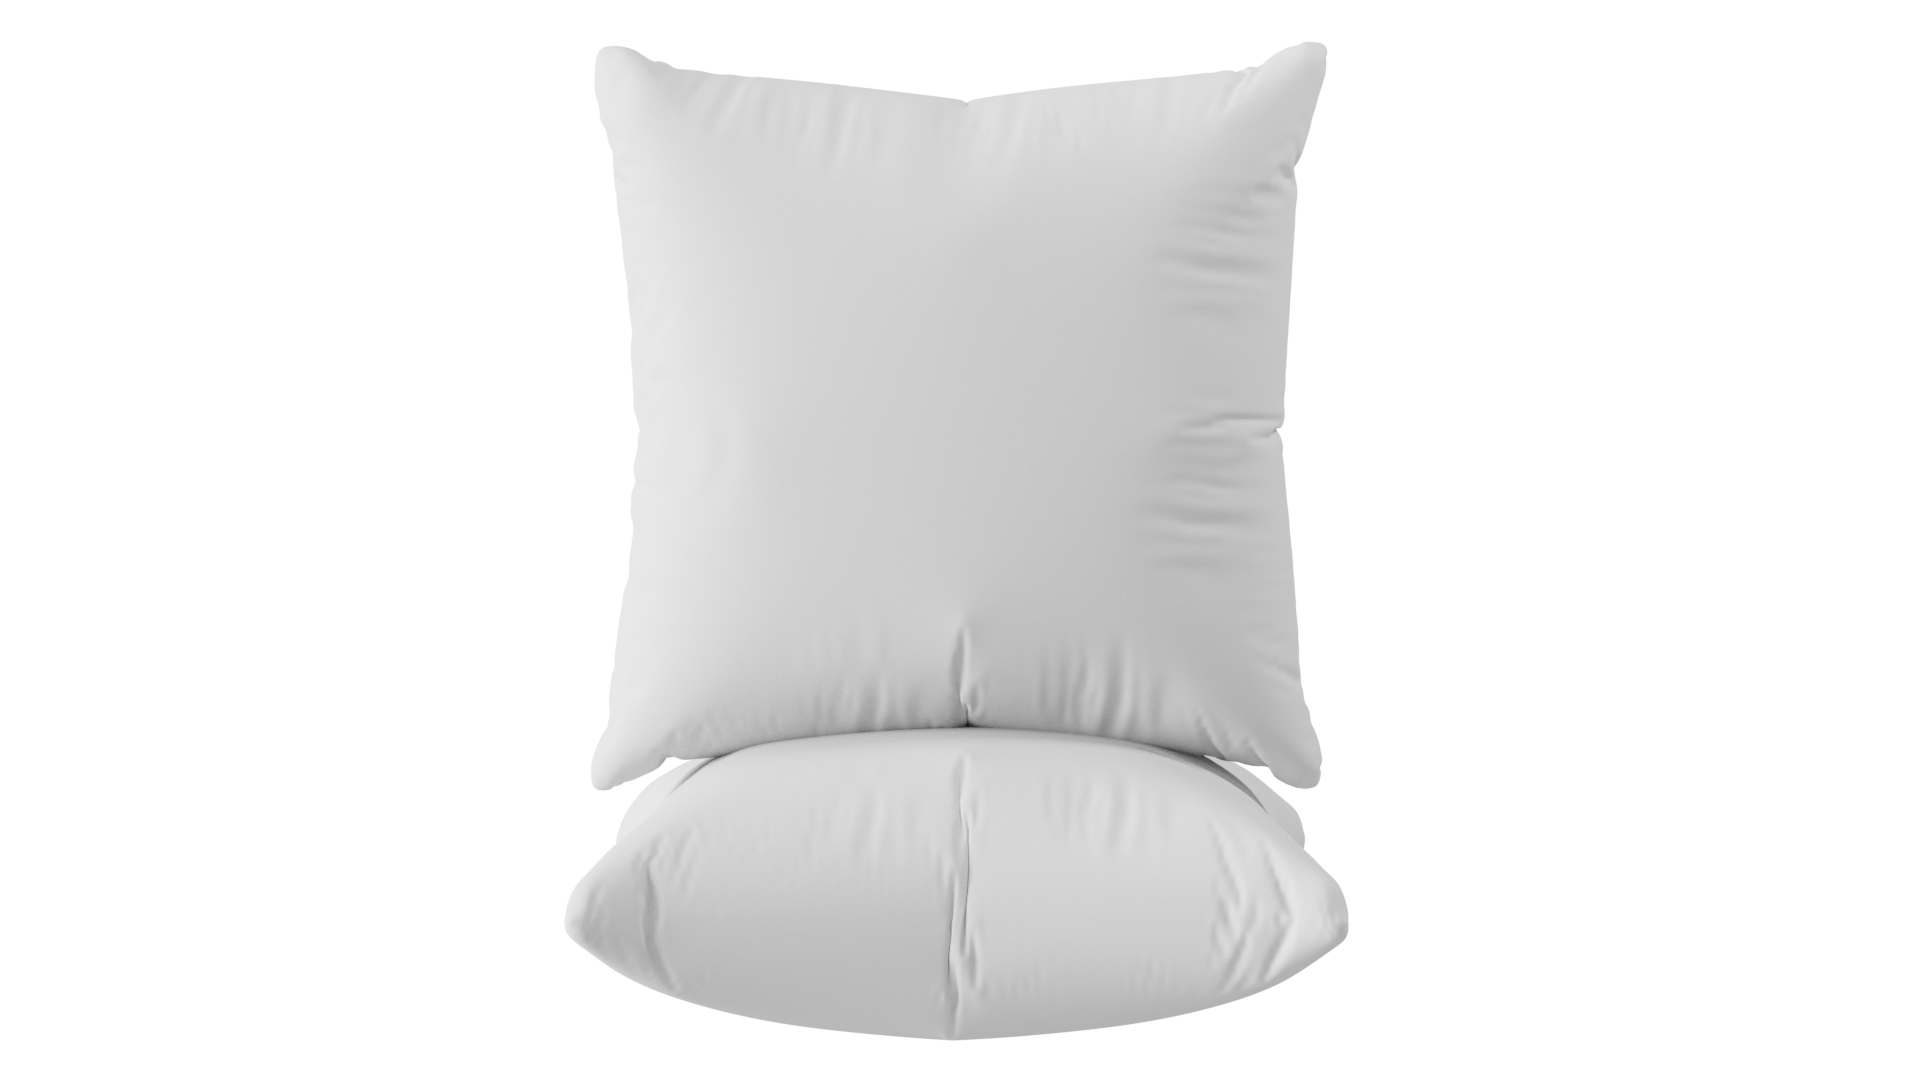 Utopia Bedding Throw Pillows Insert (Pack of 2, White) NIP - Lil Dusty  Online Auctions - All Estate Services, LLC